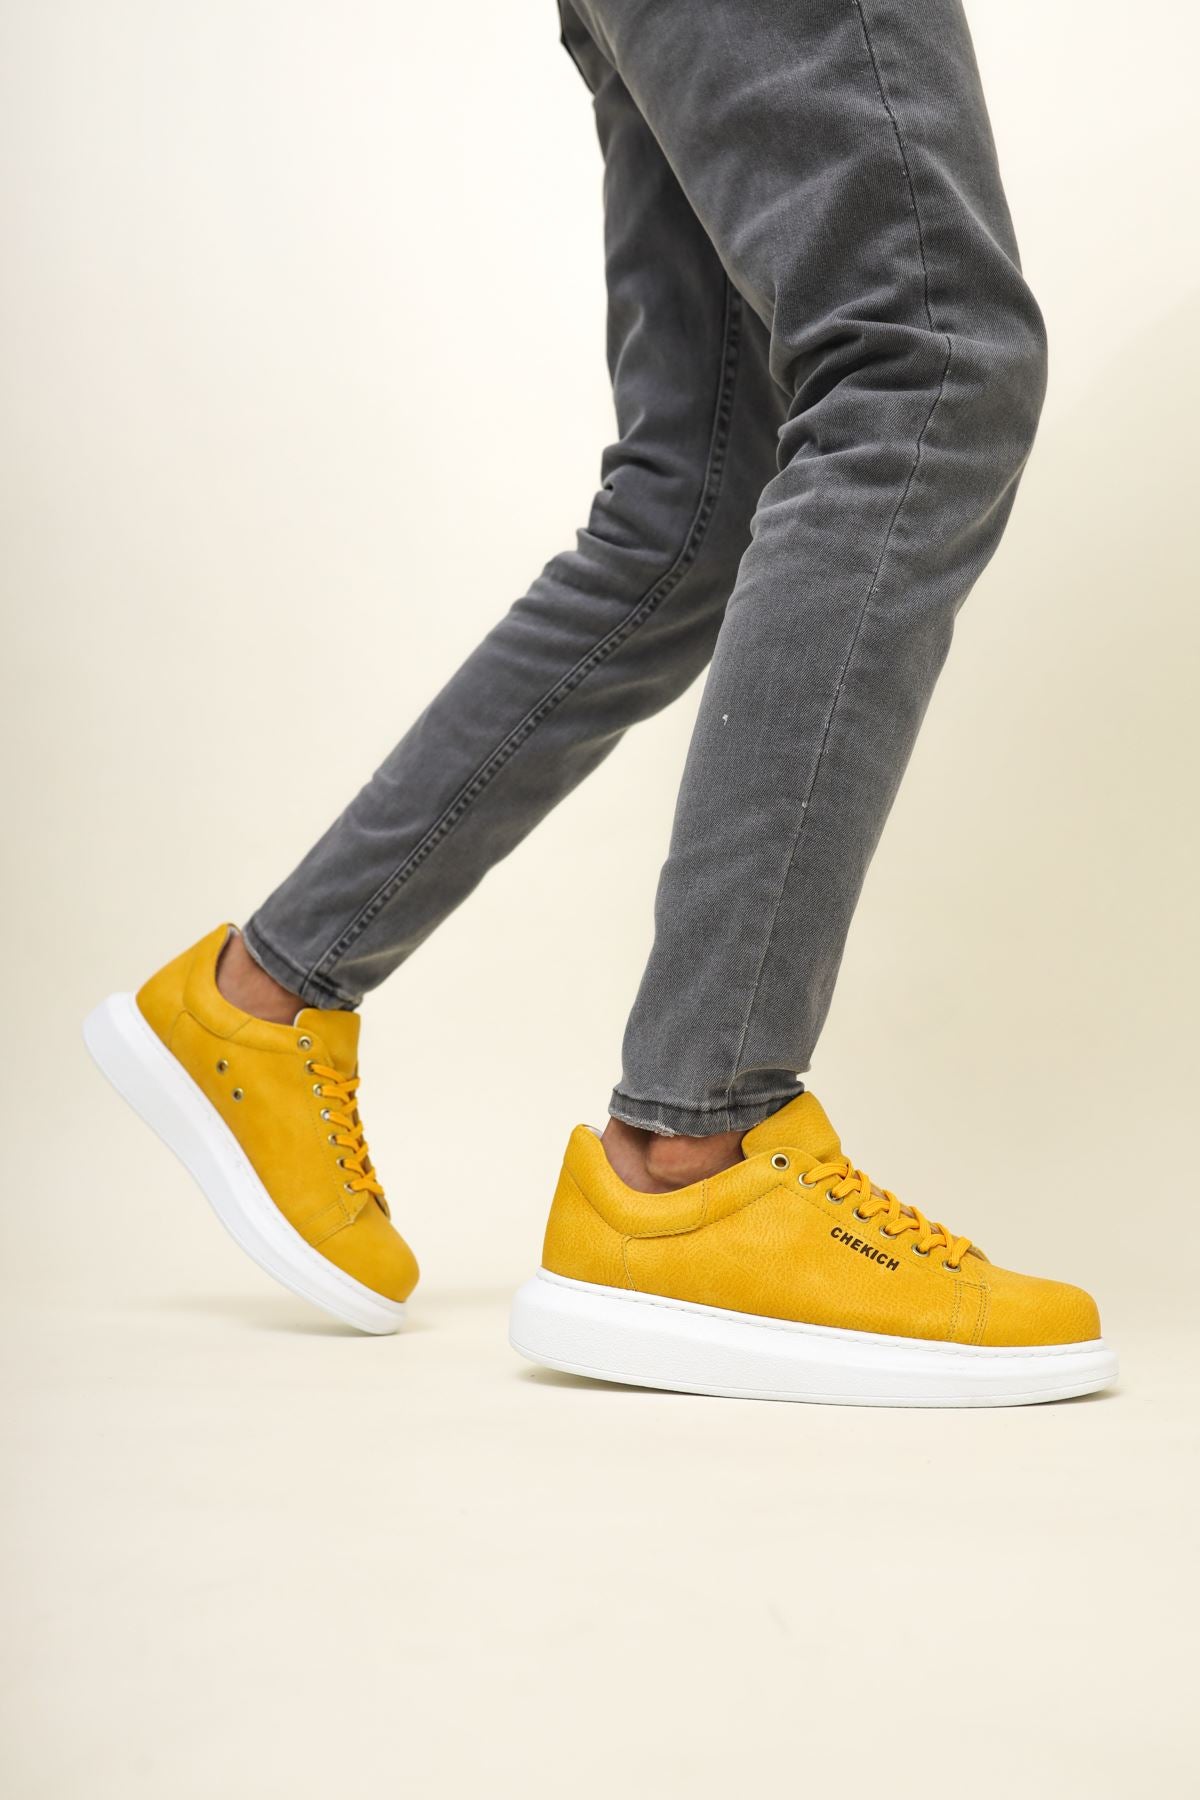 CH257 BT Men's Sneakers Shoes YELLOW - STREETMODE™